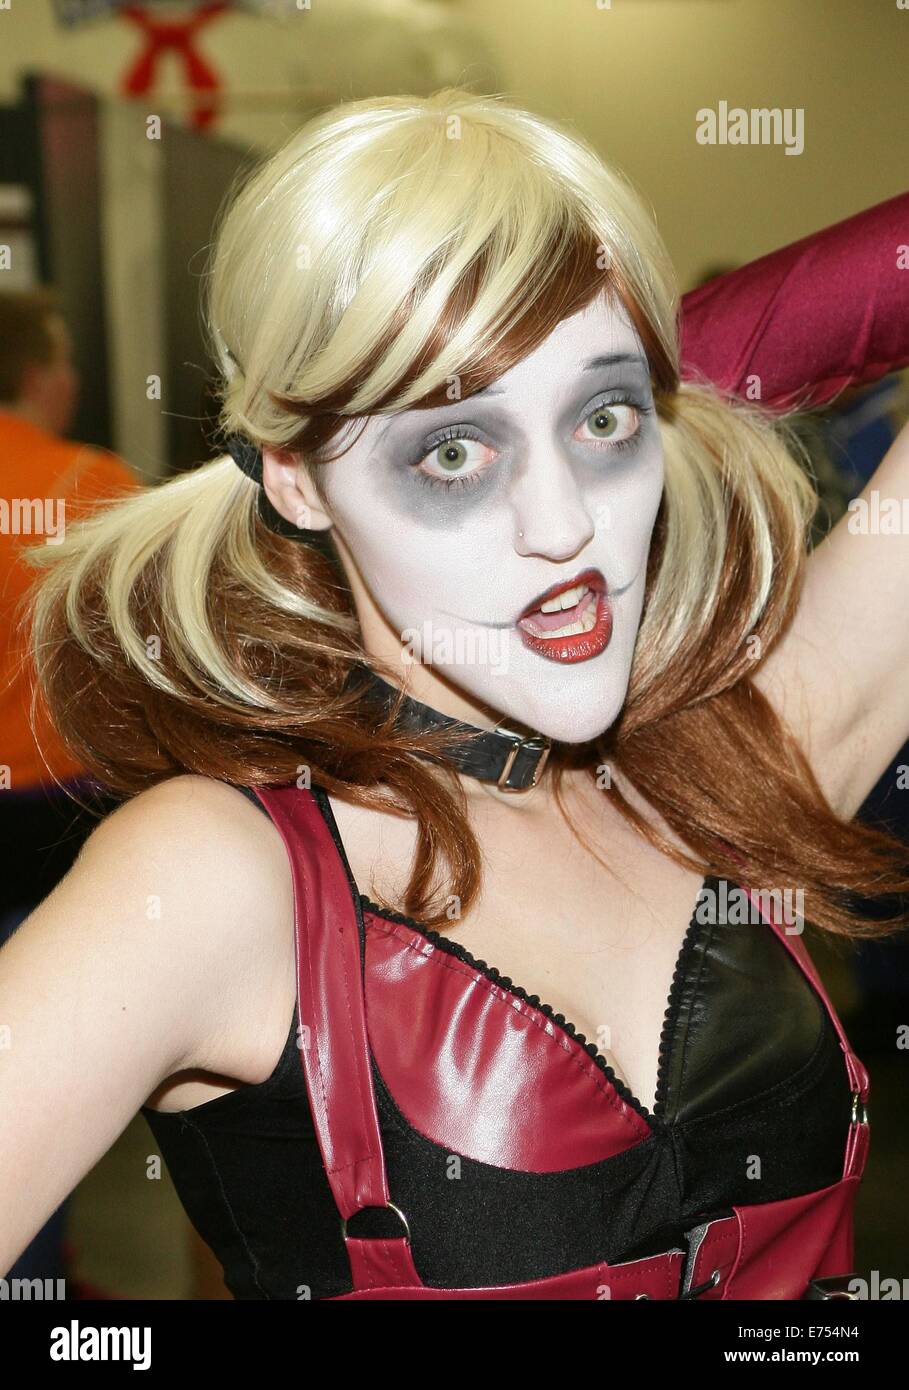 Salt Lake City, CA. 6th Sep, 2014. Fan dressed in Harley Quinn costume in attendance for Salt Lake COMICON 2014 - SAT, Salt Palace Convention Center, Salt Lake City, CA September 6, 2014. Credit:  James Atoa/Everett Collection/Alamy Live News Stock Photo